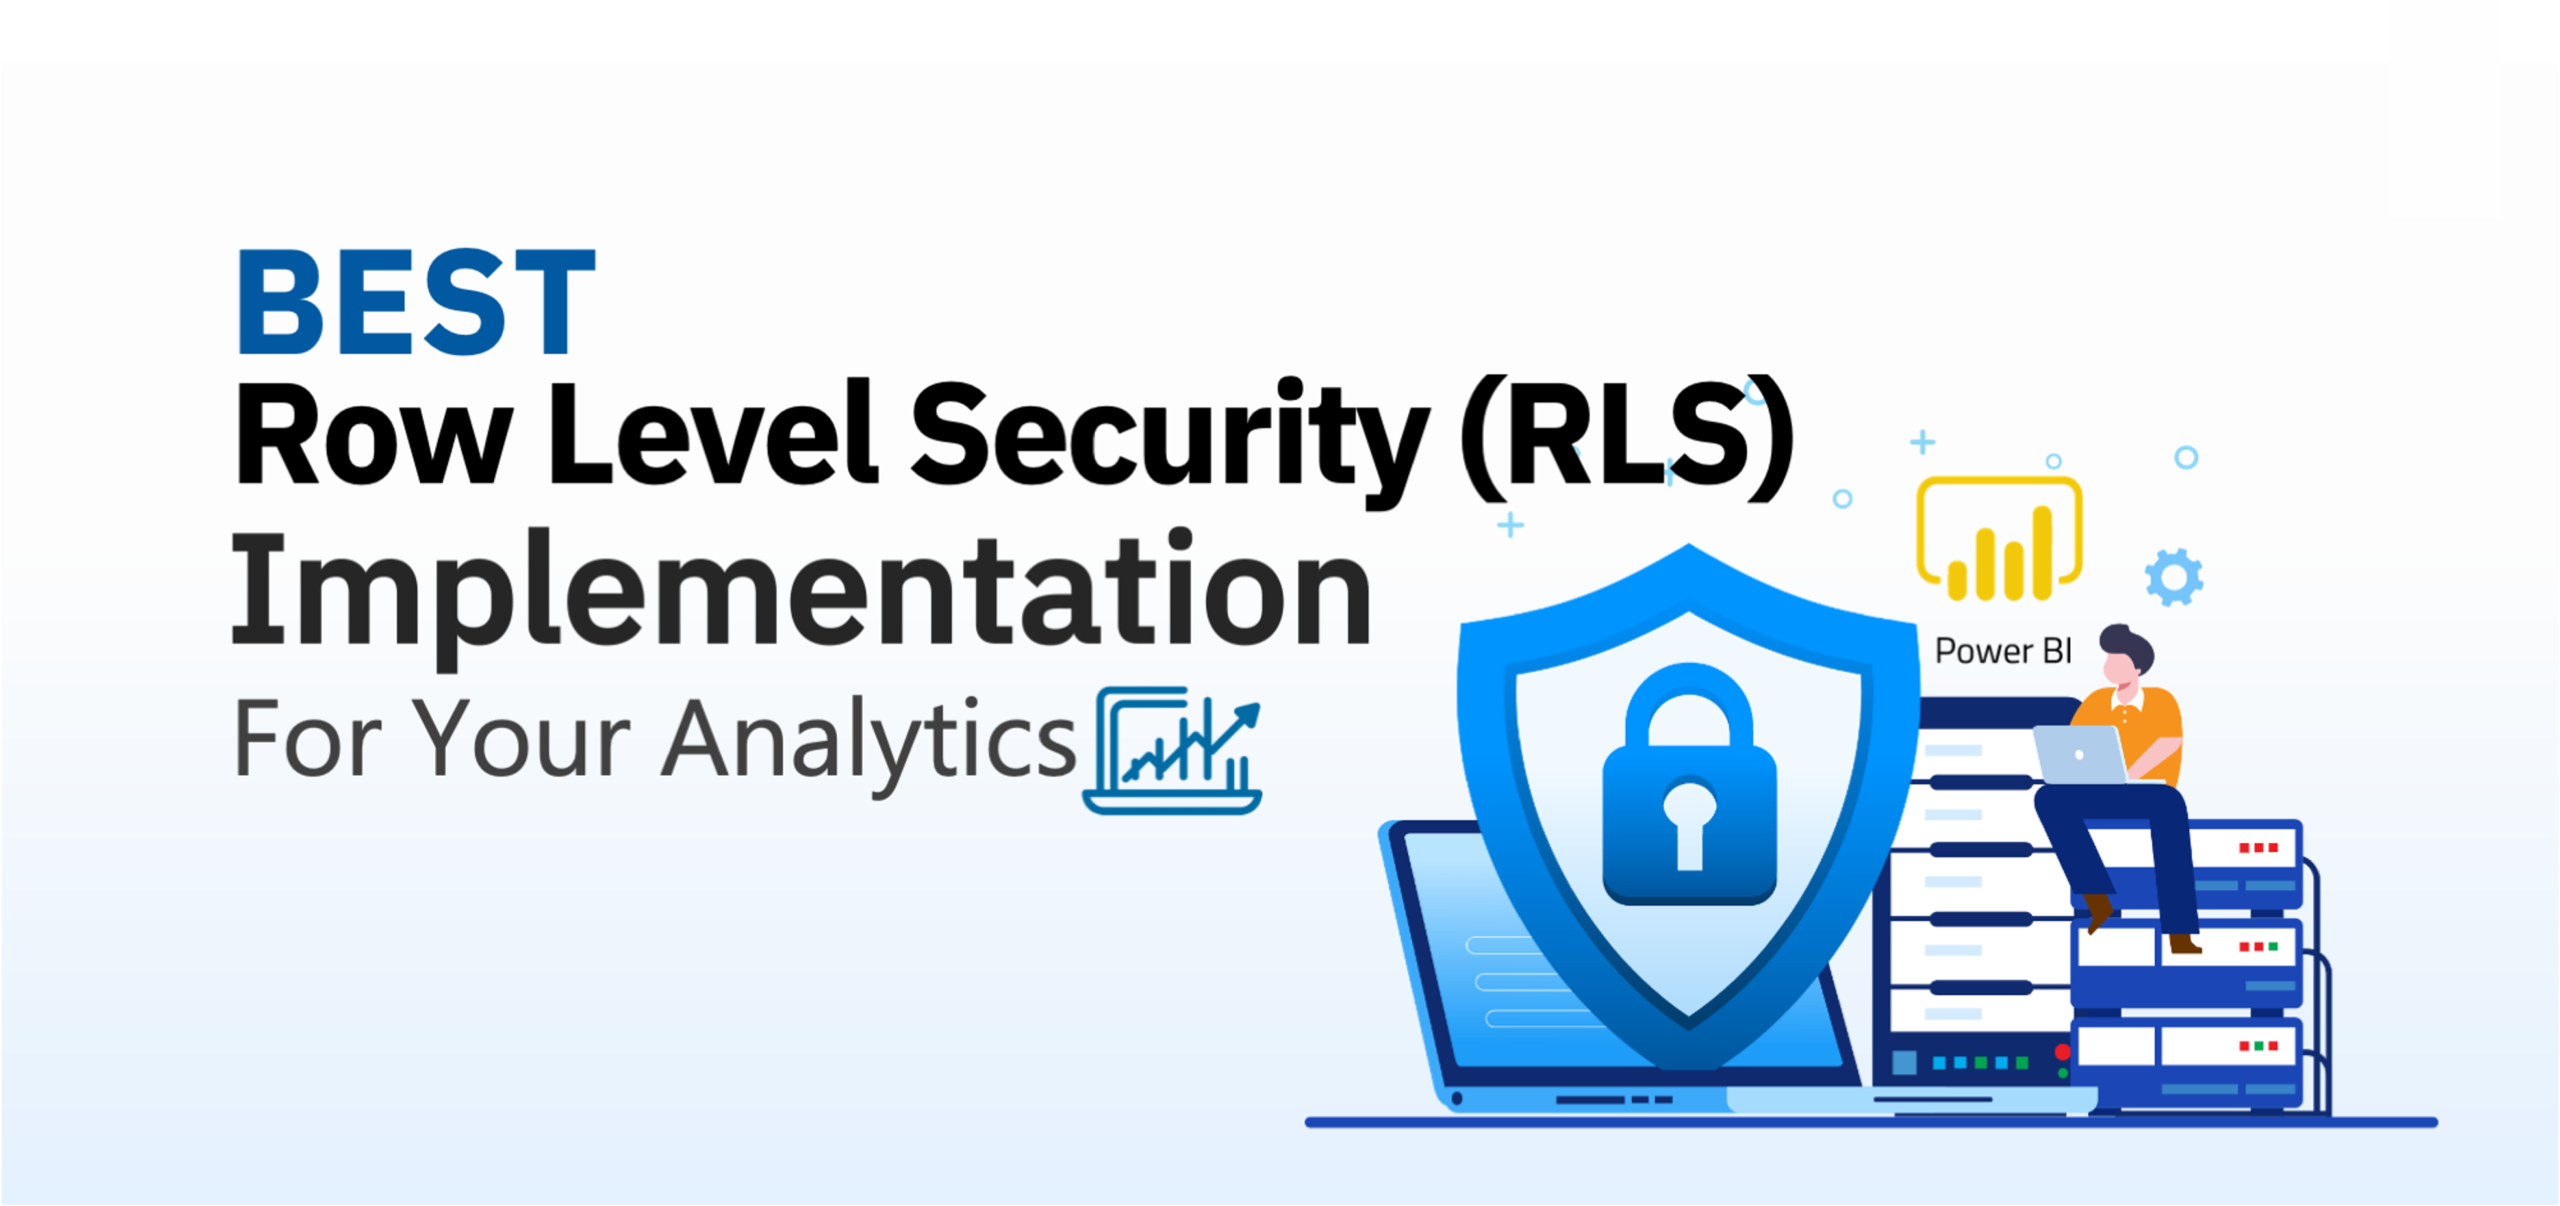 Best Row Level Security (RLS) Implementation For Your Analytics